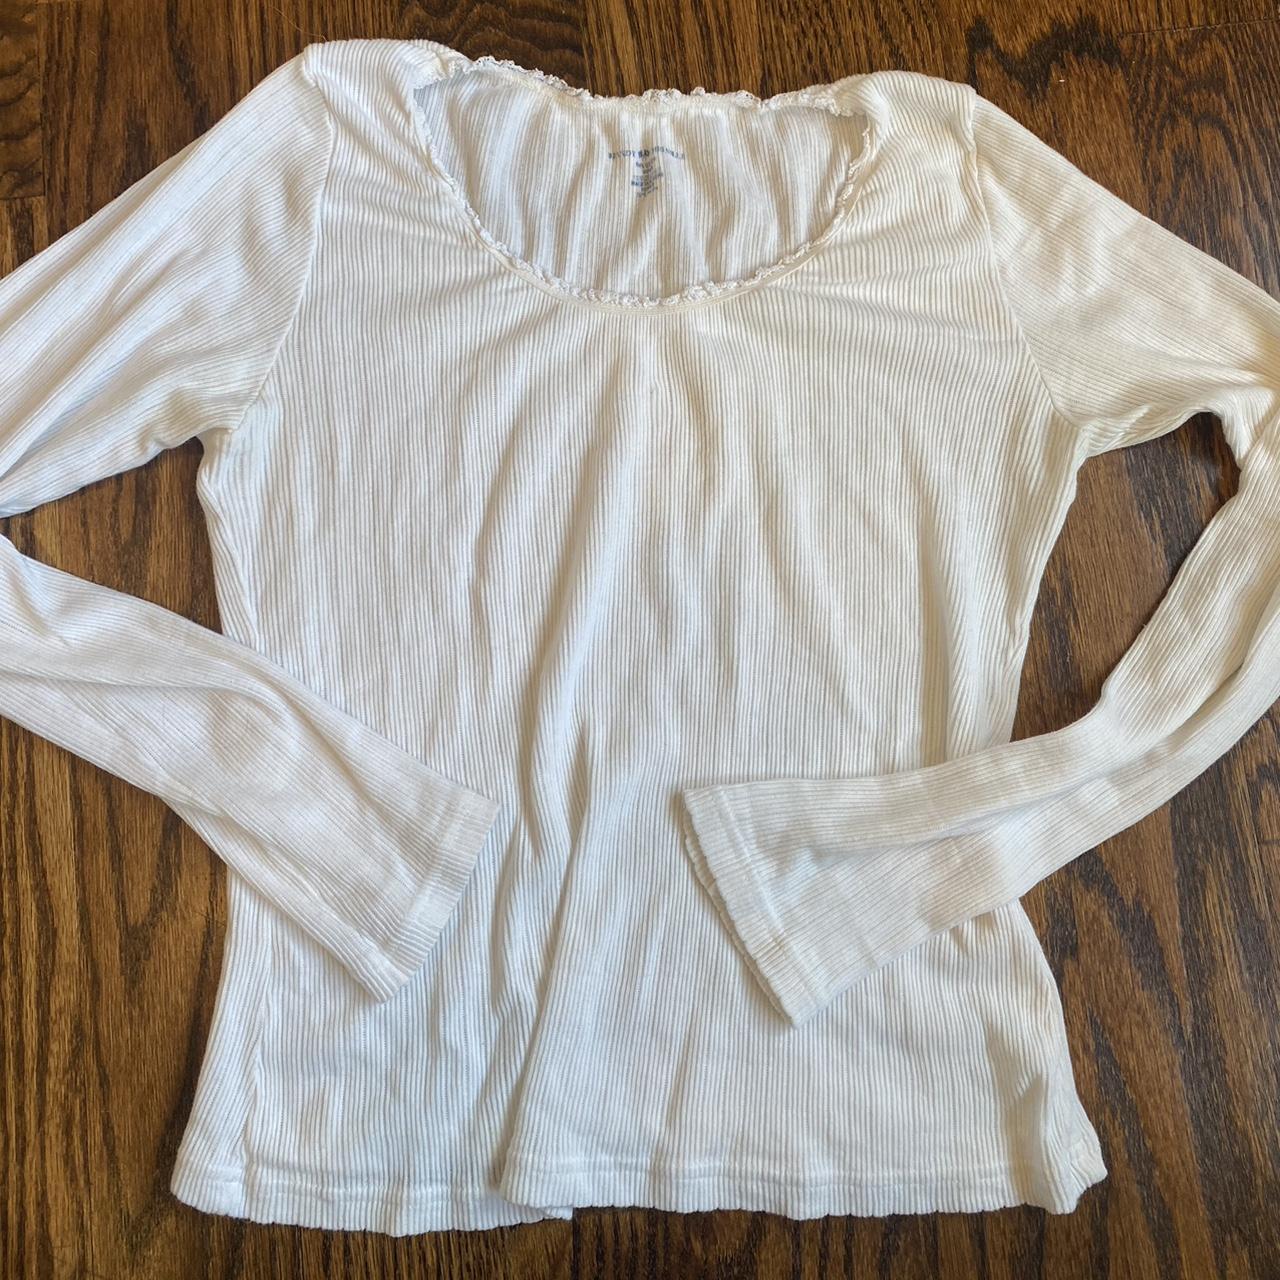 Brandy Melville white long sleeve top with ruffle